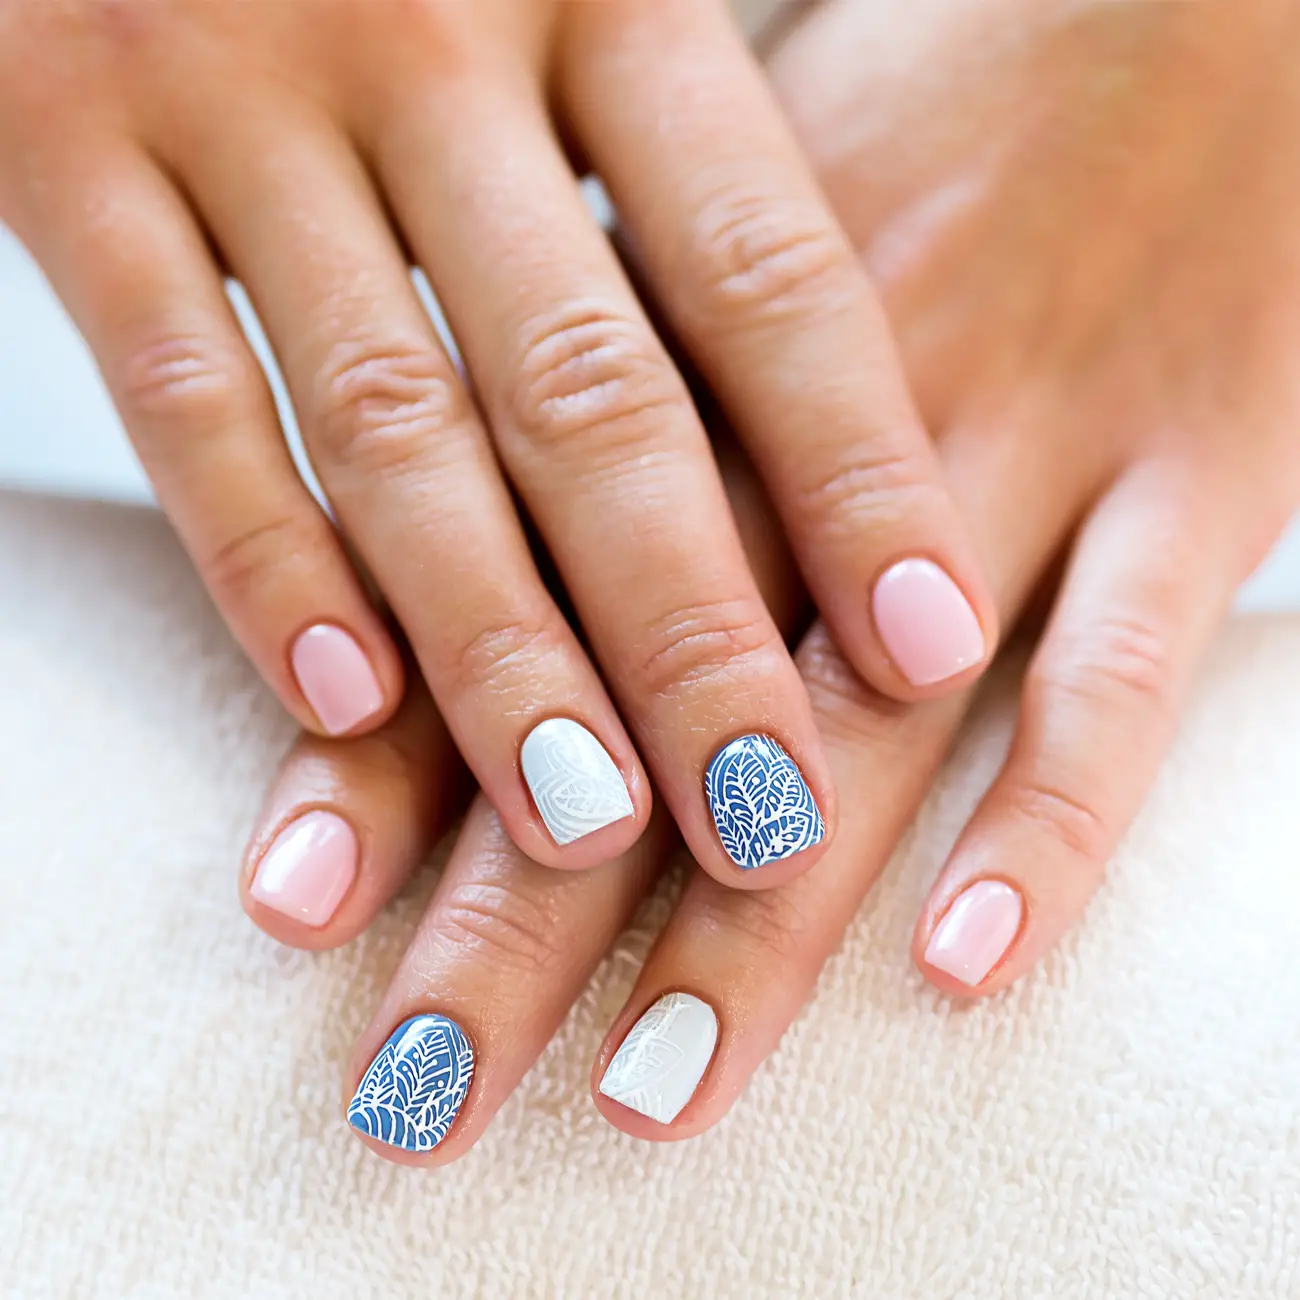 Do This Before Every Manicure for Healthy Cuticles and Nails